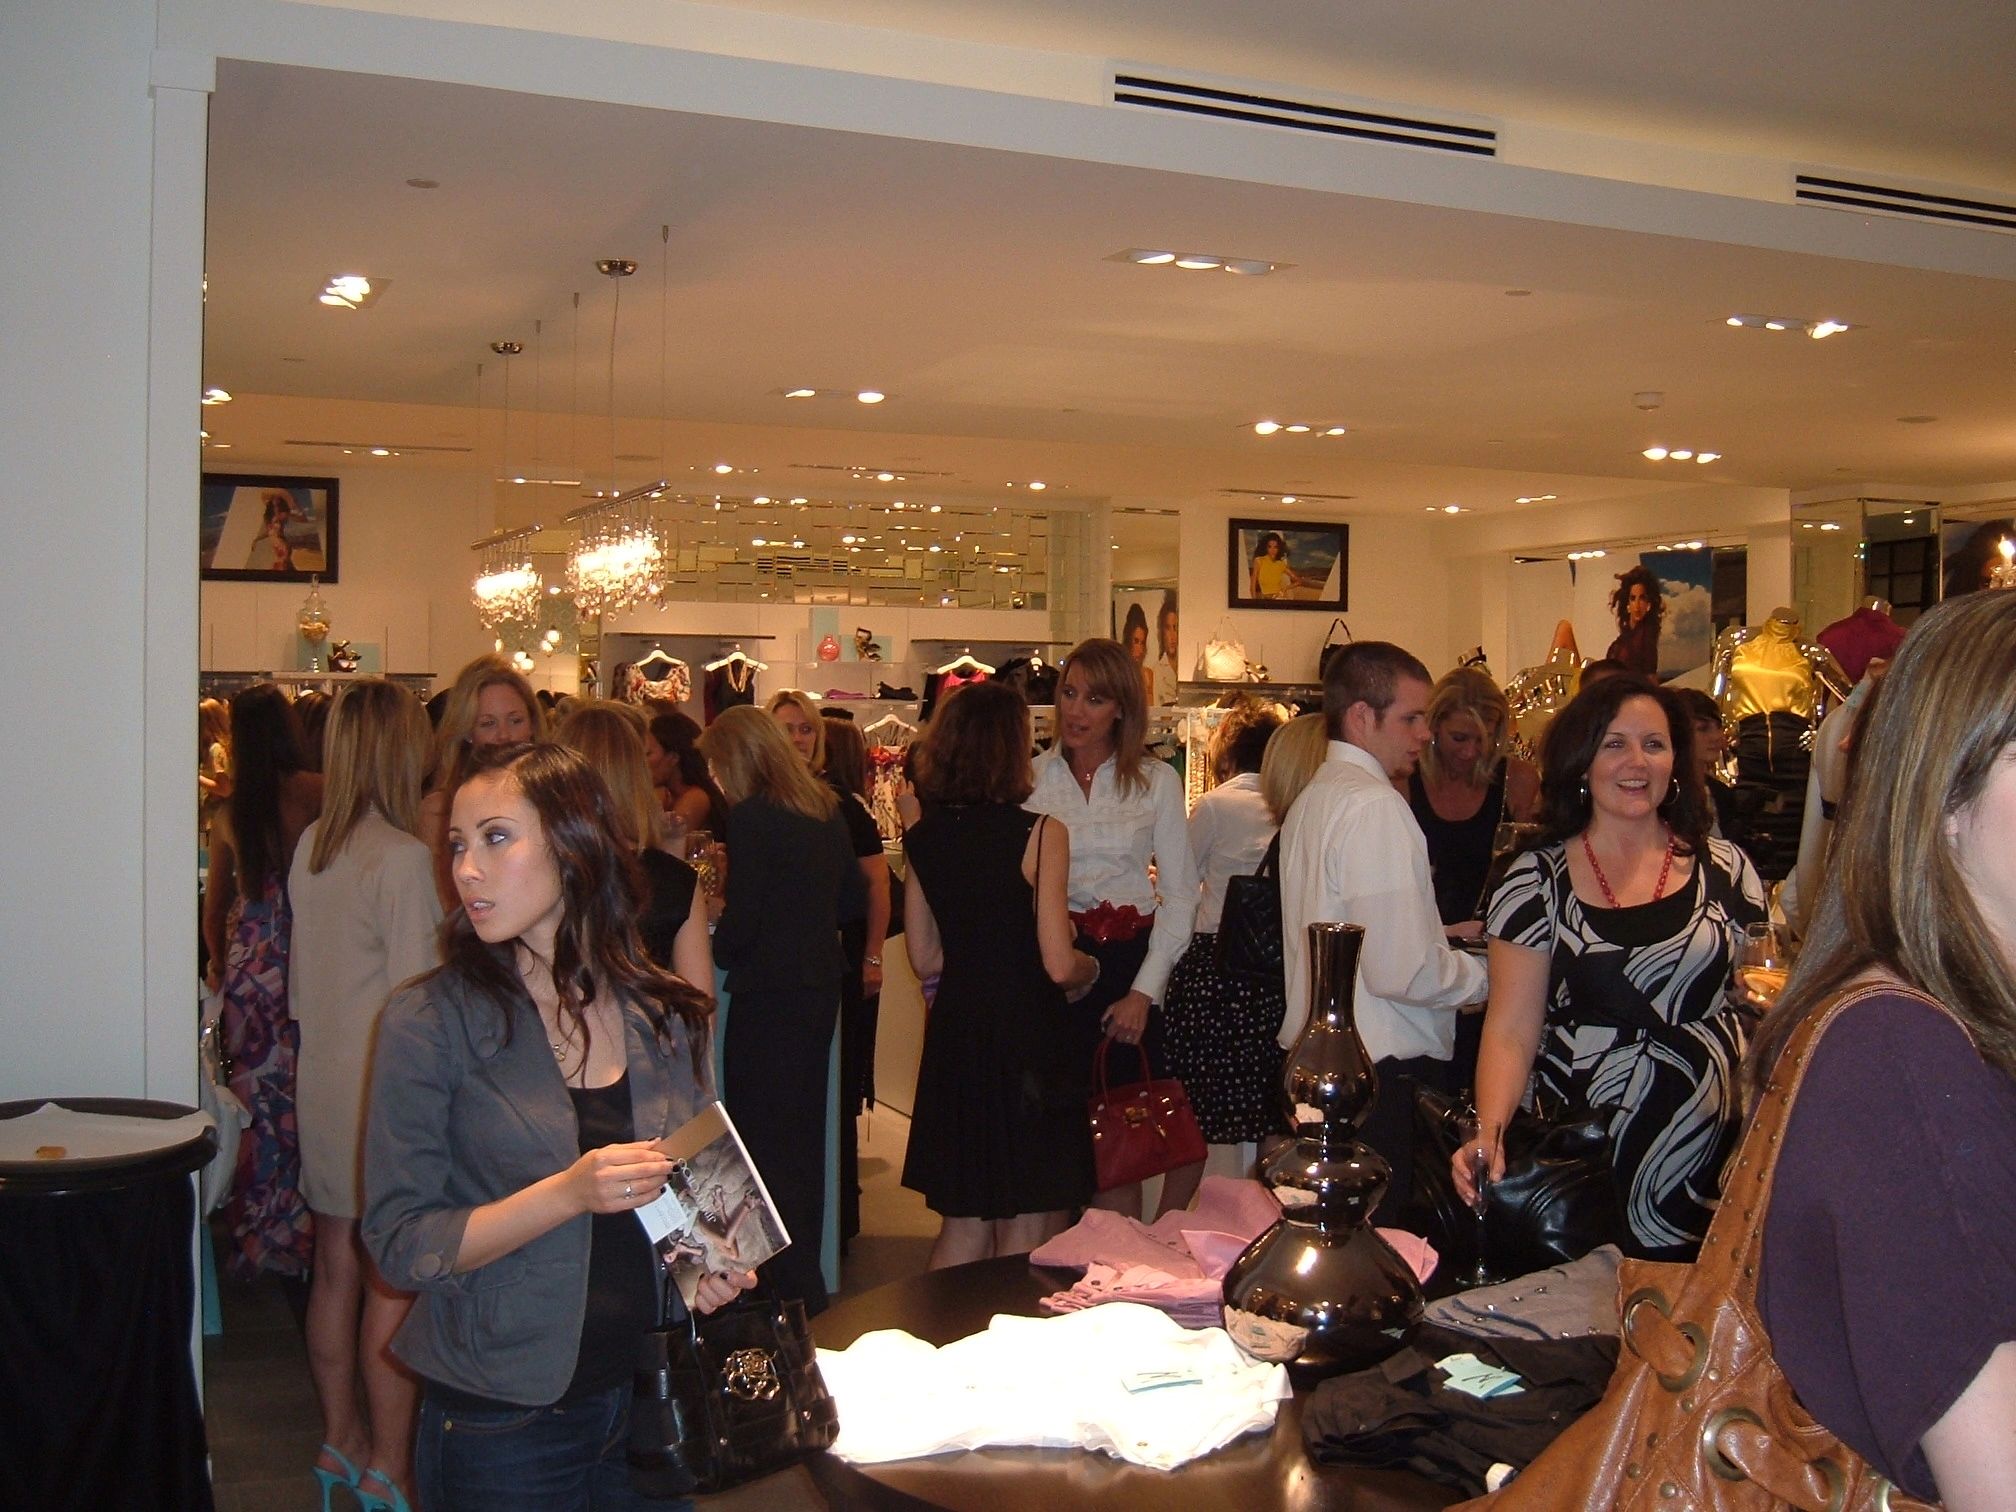 View_of_Marciano_event_crowd.JPG